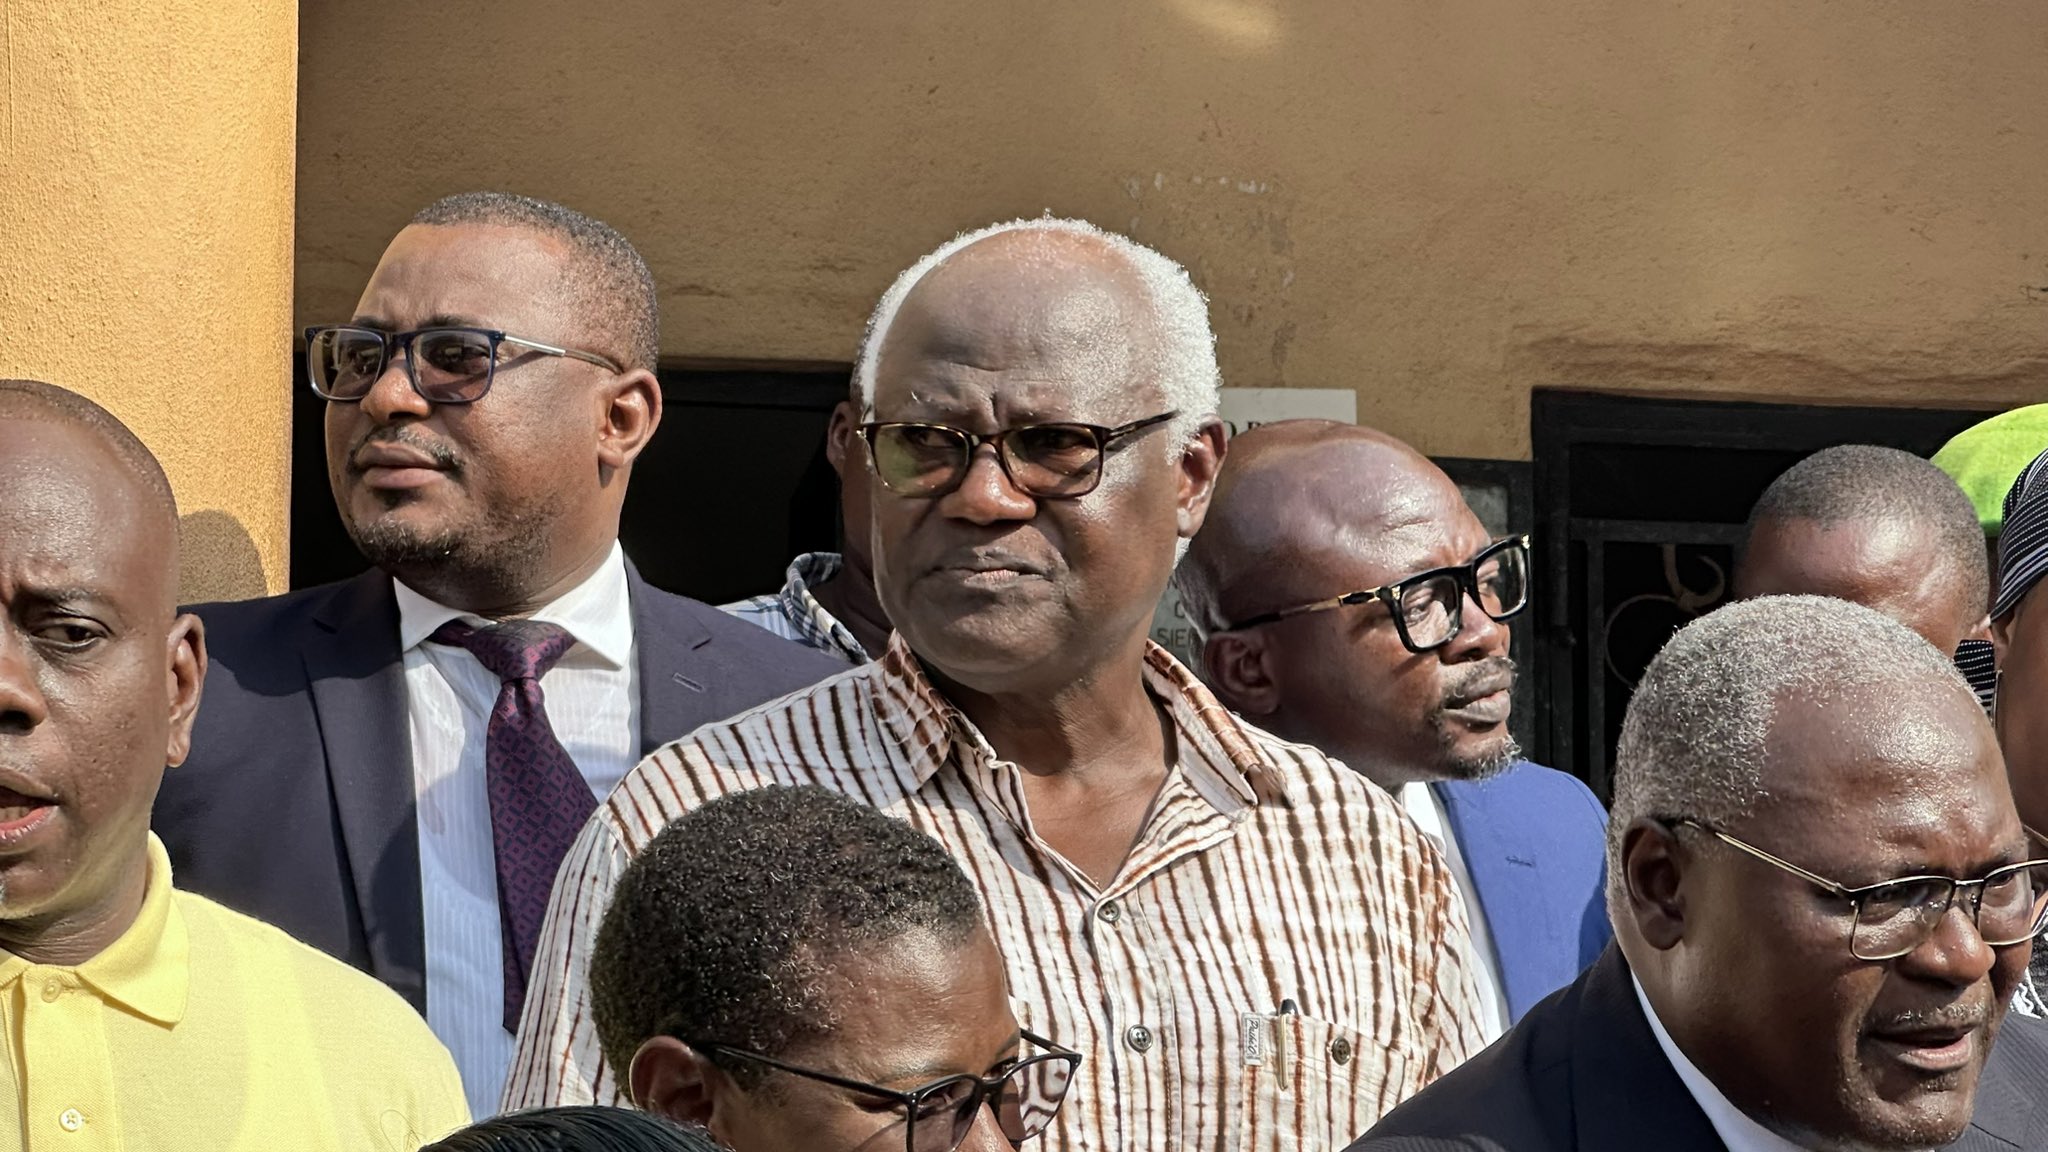 Sierra Leone's Ex-President, Koroma To Begin Exile In Nigeria After Being Charged With Treason 